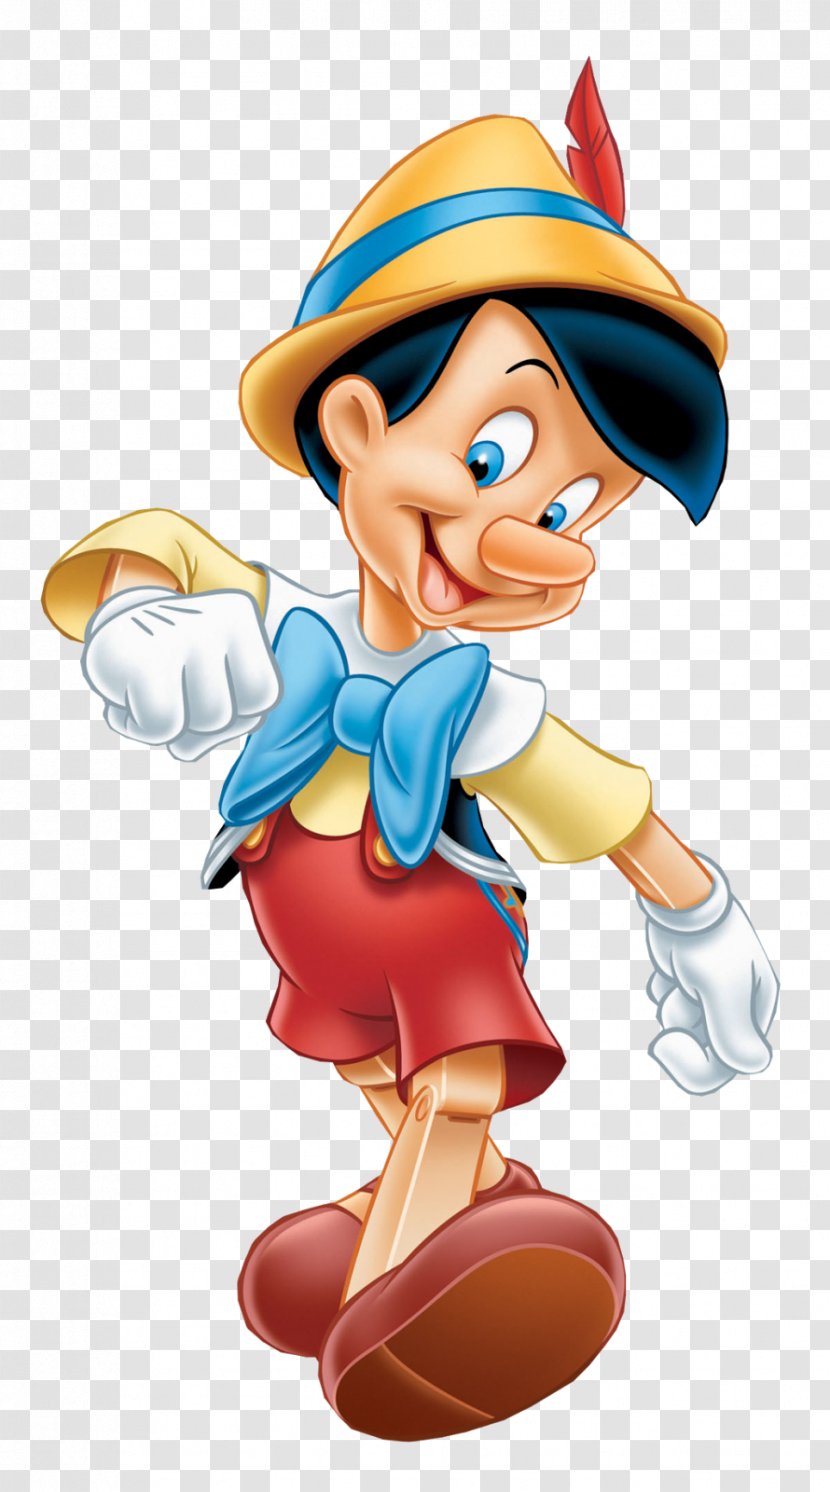 Jiminy Cricket The Adventures Of Pinocchio Figaro Minnie Mouse Geppetto - Mascot Transparent PNG